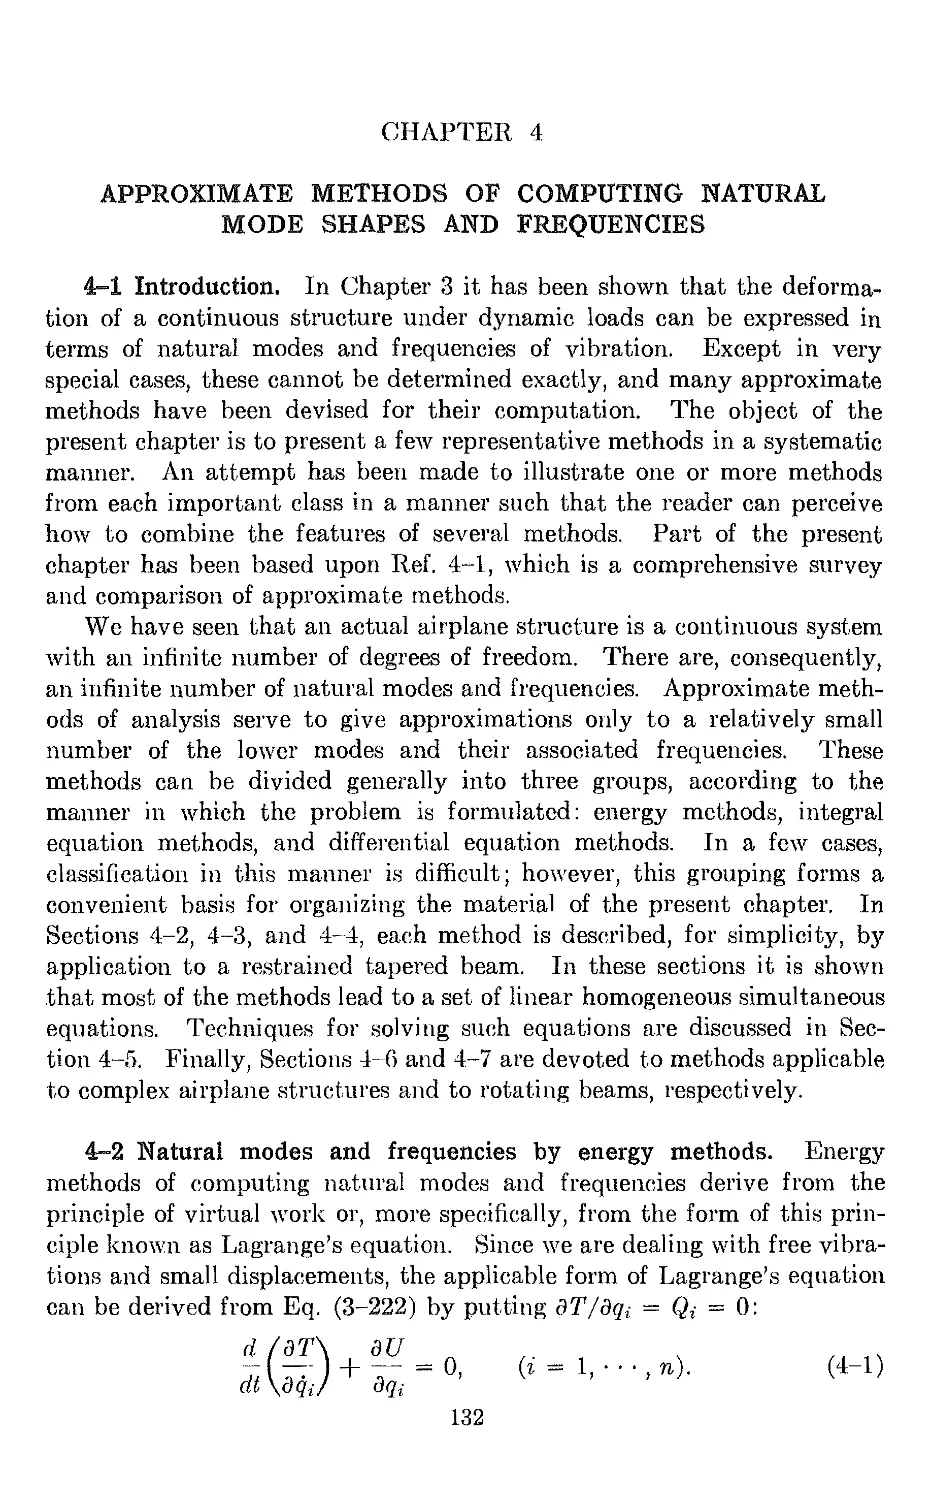 Chapter 4. Approximate Methods of Computing Natural Mode Shapes and Frequencies
4.2 Natural modes and frequencies by energy methods